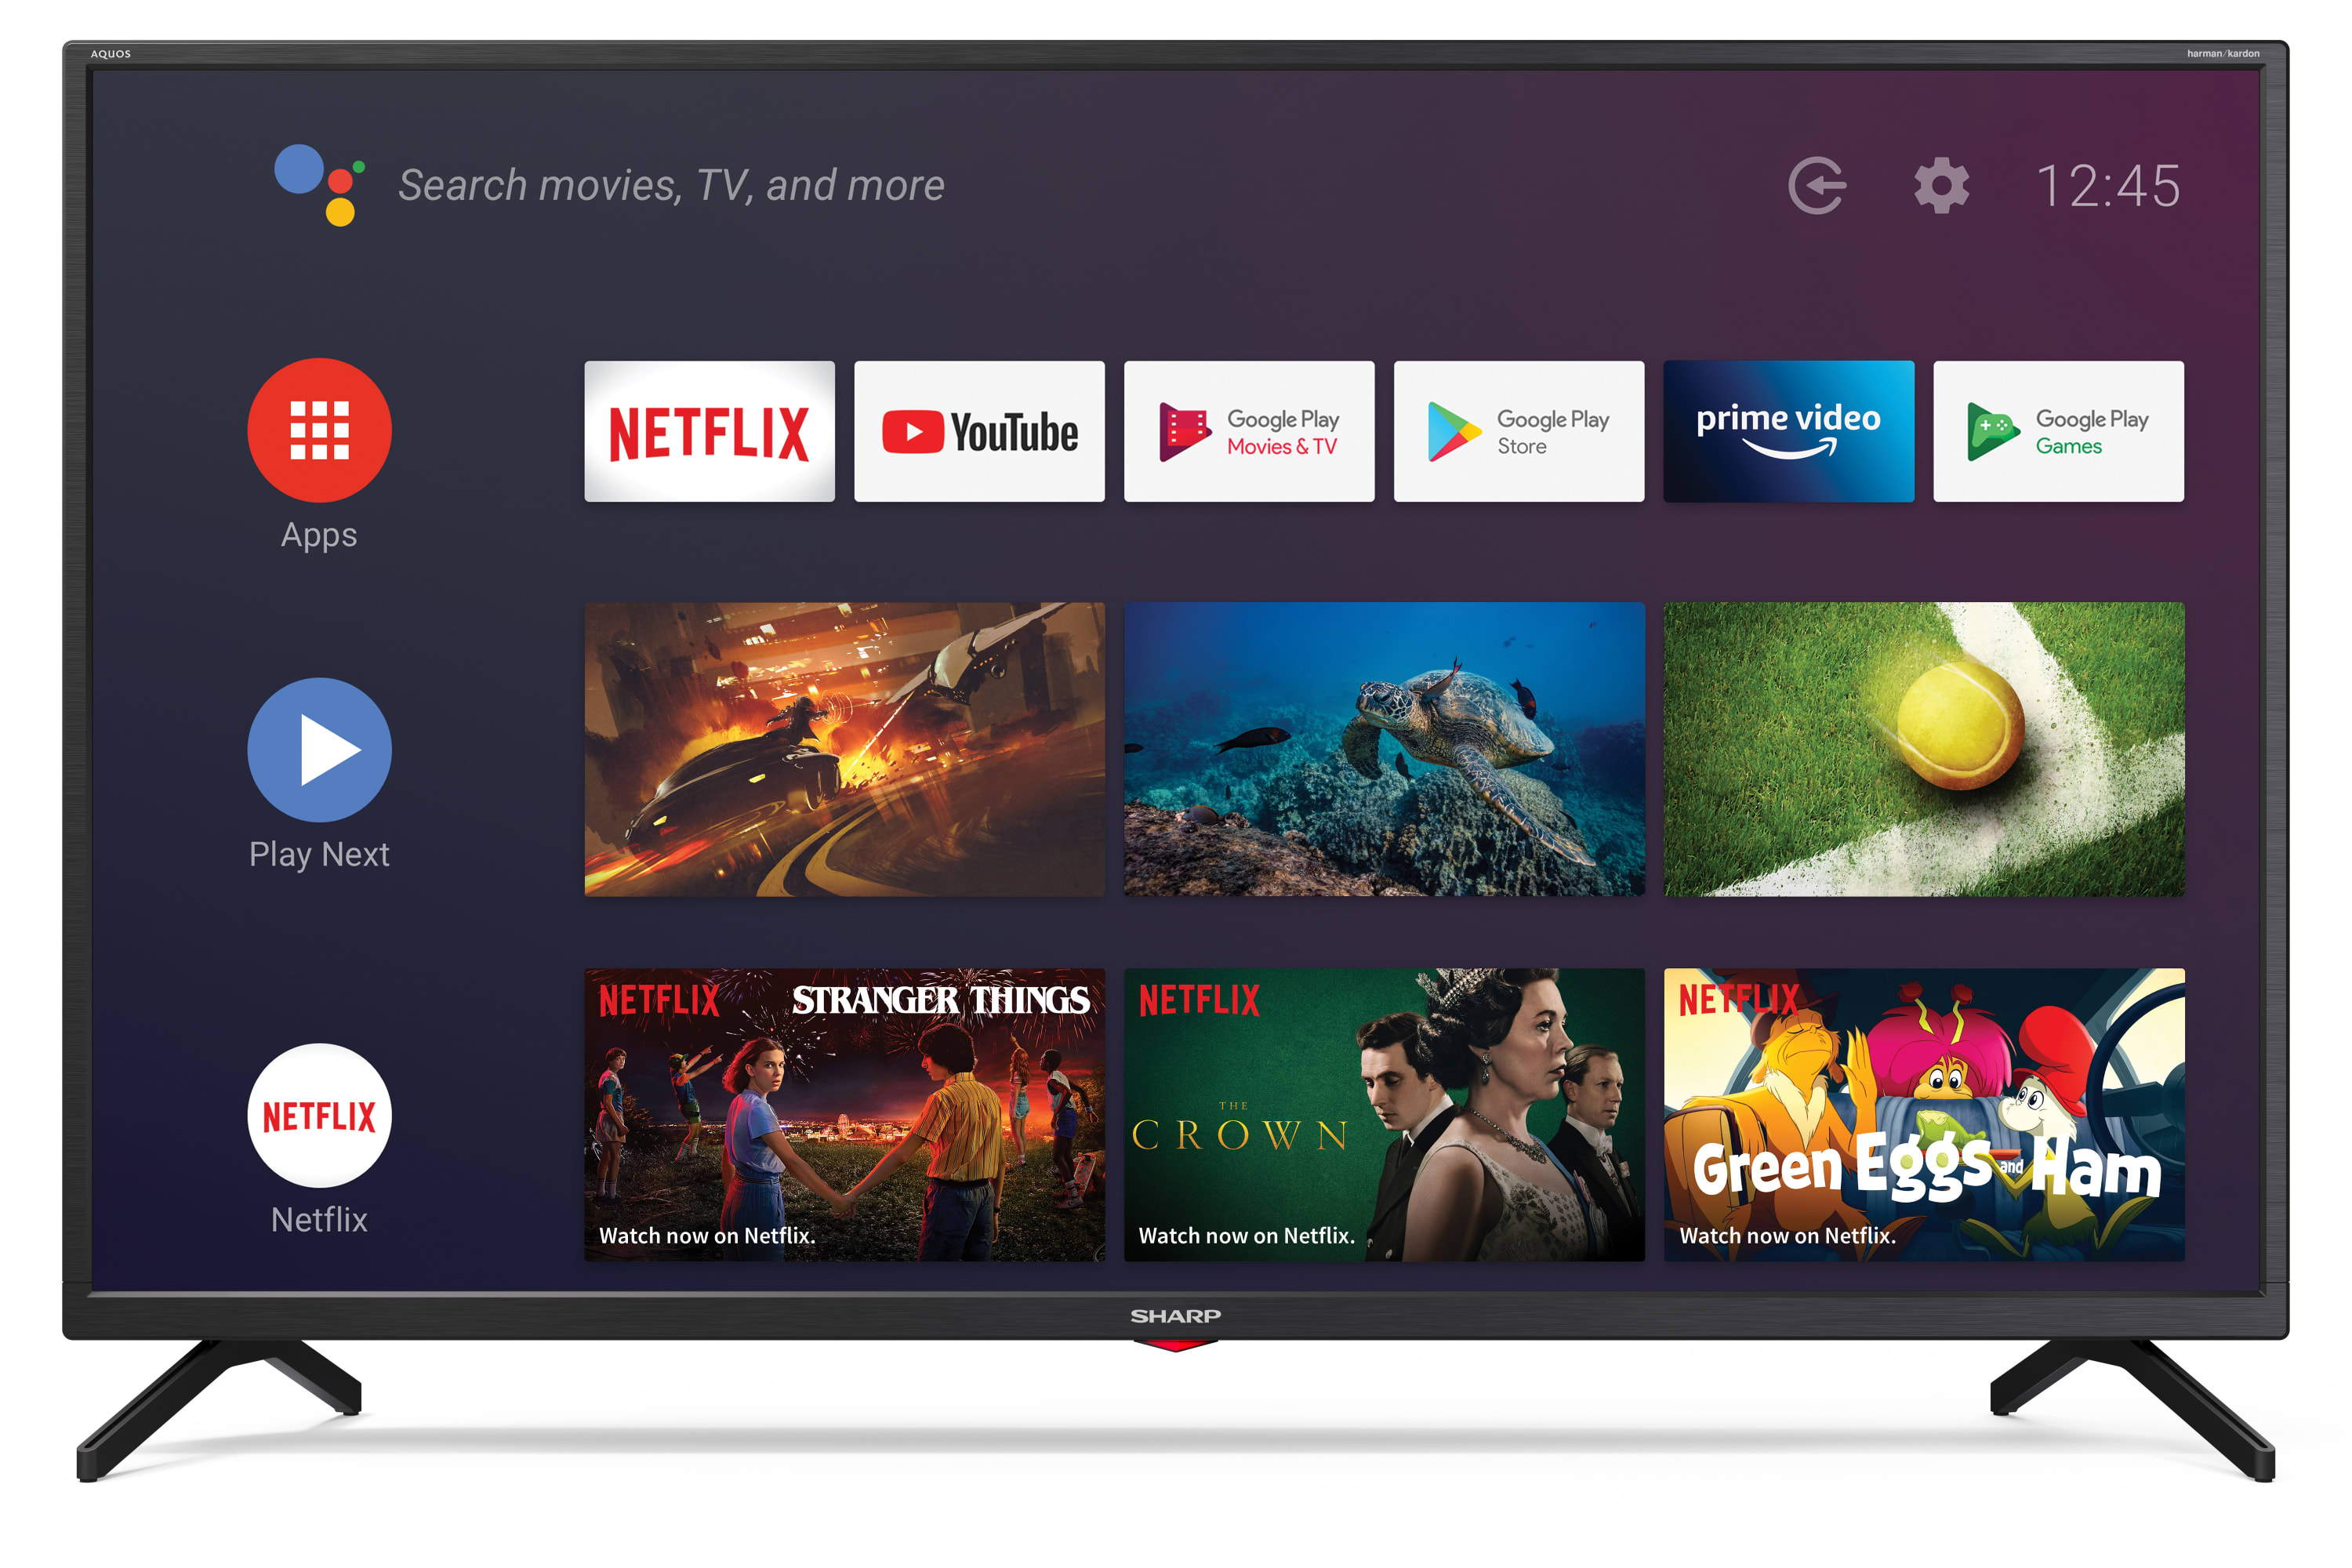 Android TV 4K UHD - ANDROID TV™ 4K HD DA 43"